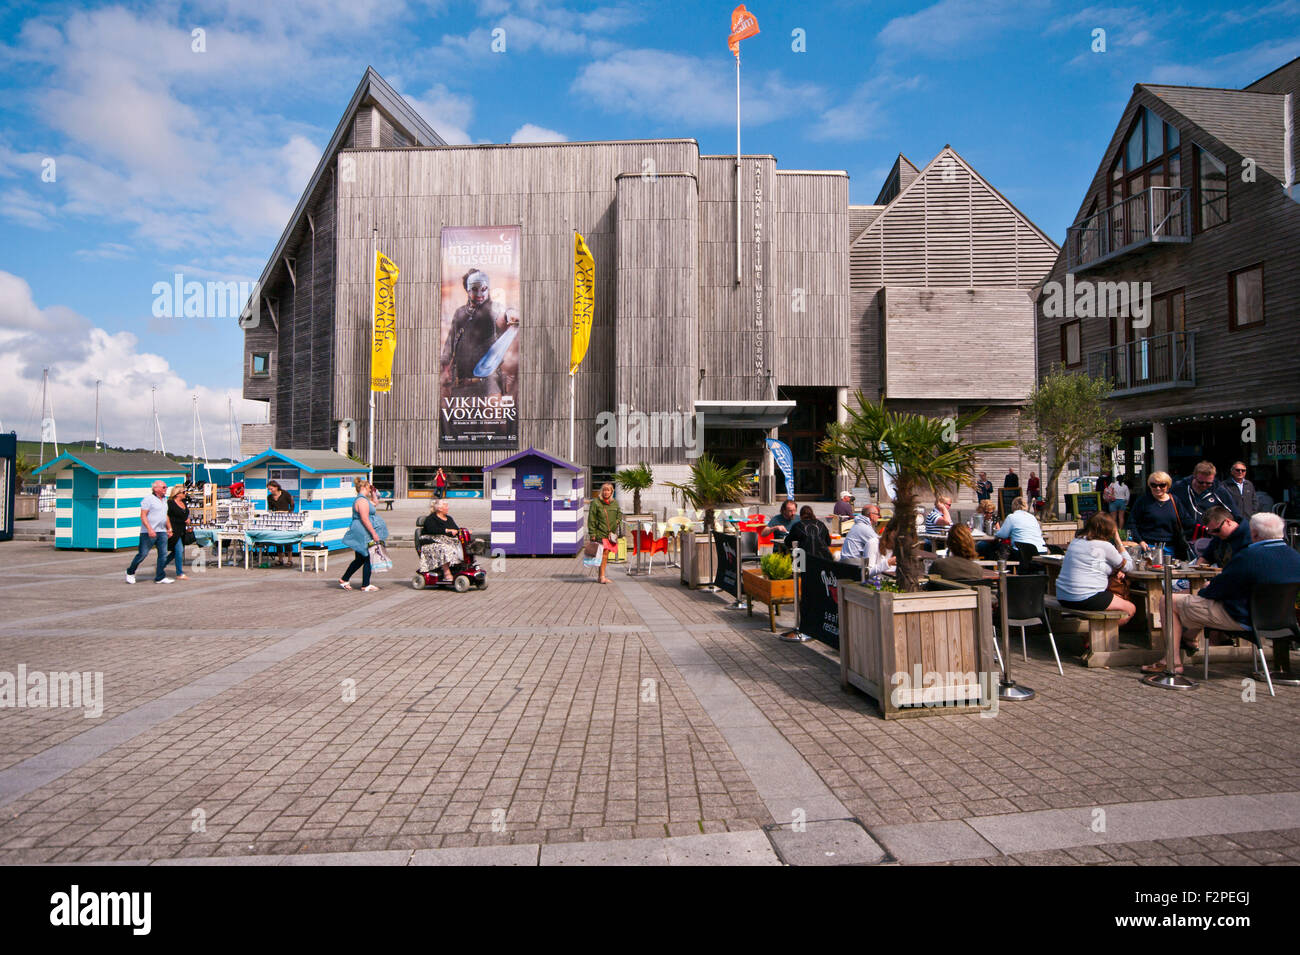 The Maritime Museum Discovery Quay Falmouth Cornwall England UK Stock Photo